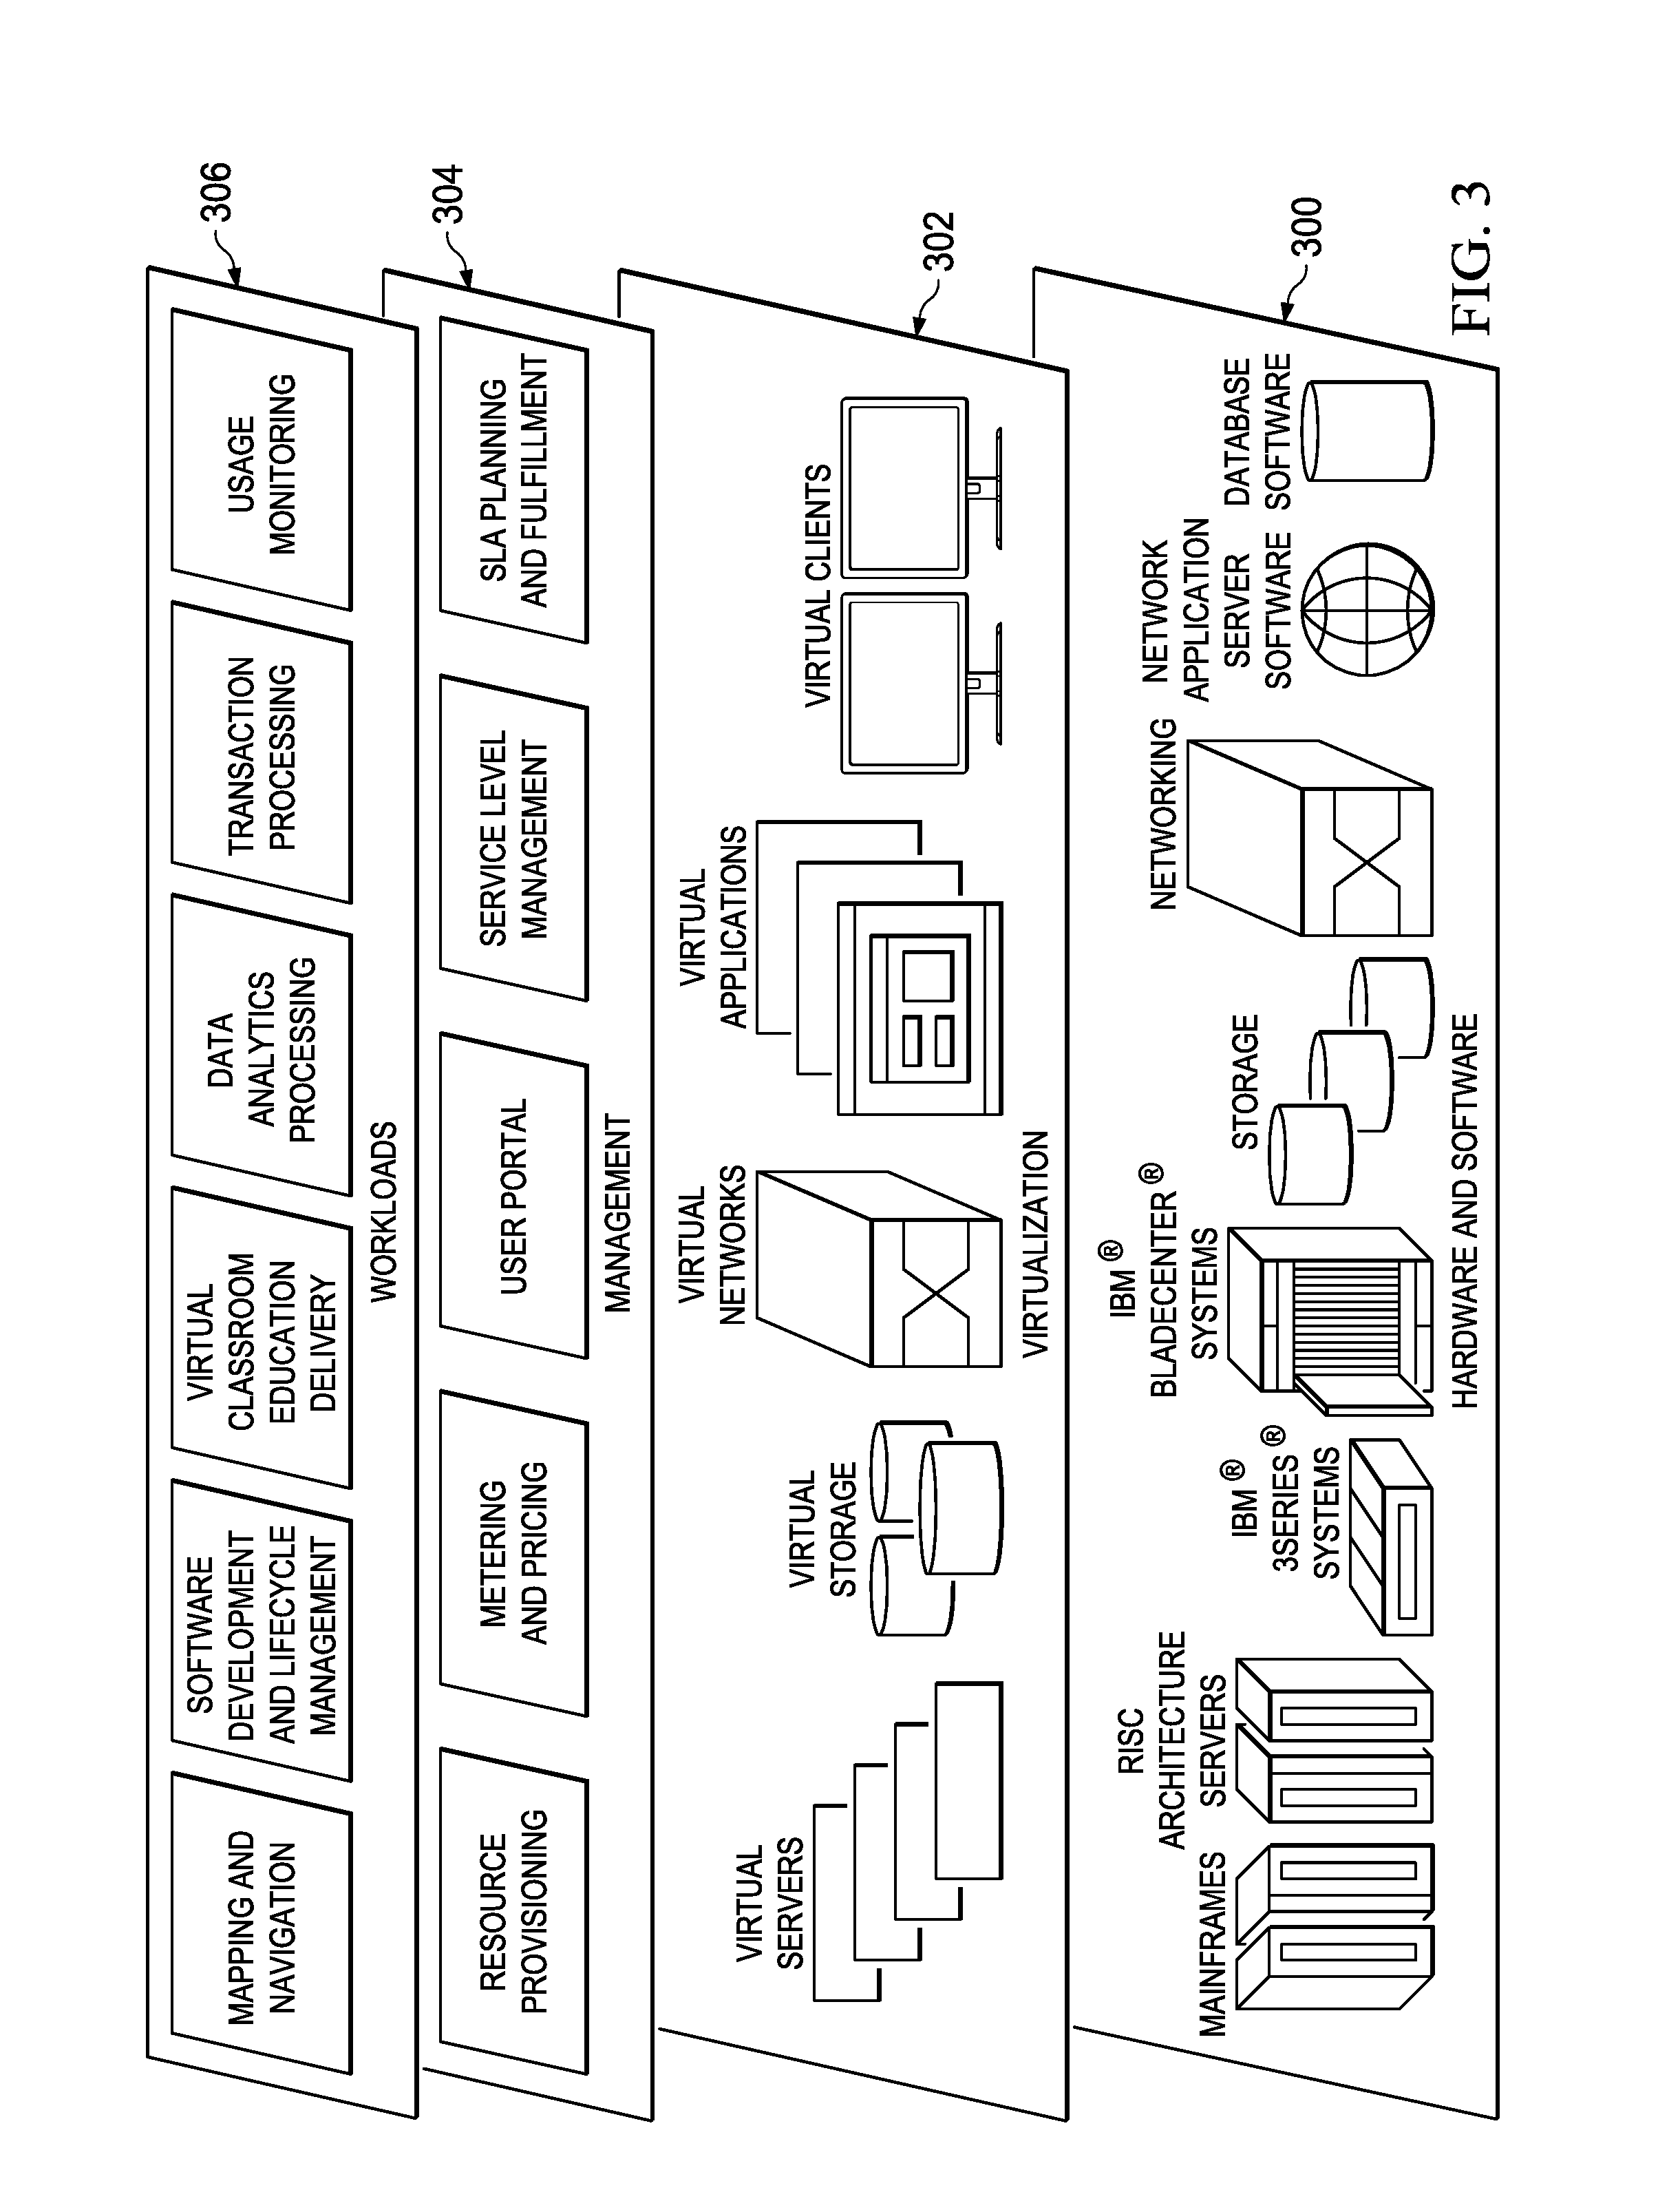 Preventing application-level denial-of-service in a multi-tenant system using parametric-sensitive transaction weighting